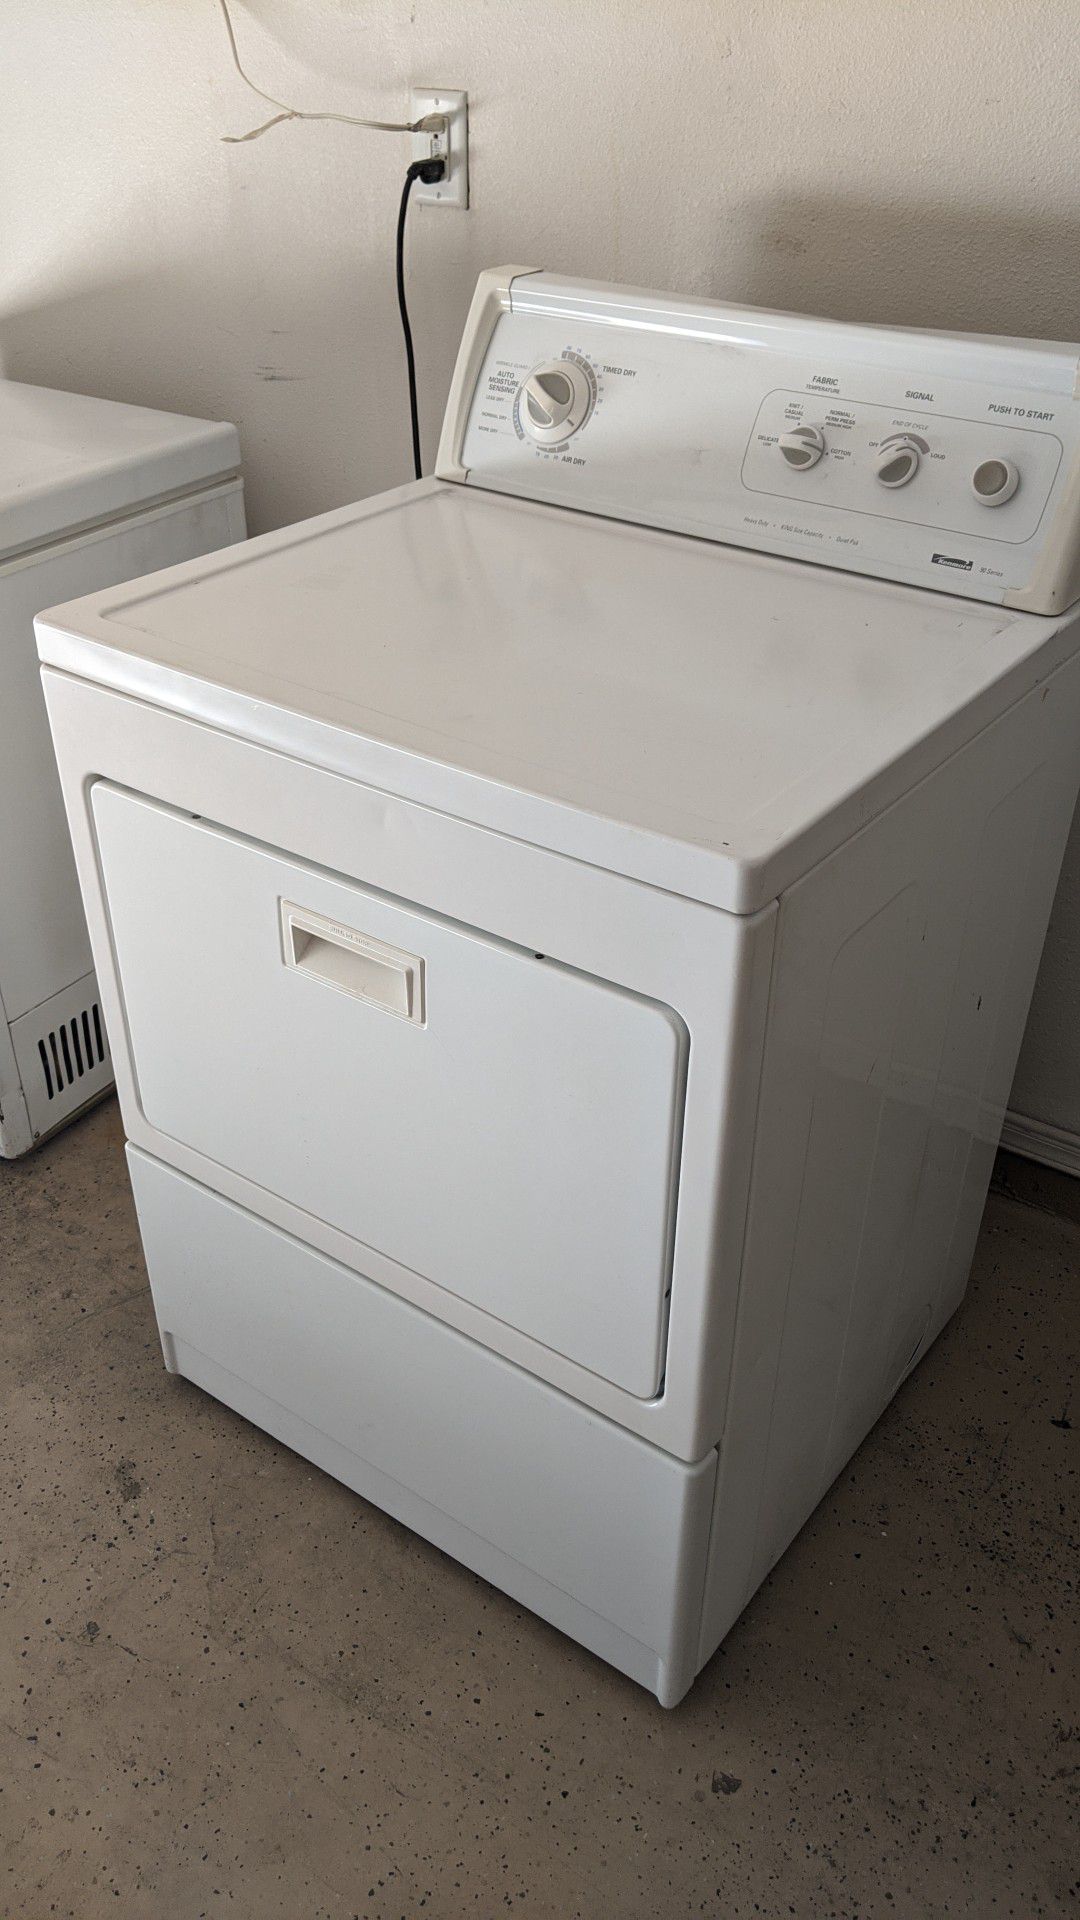 Kenmore 90 Series Dryer *does not heat up*